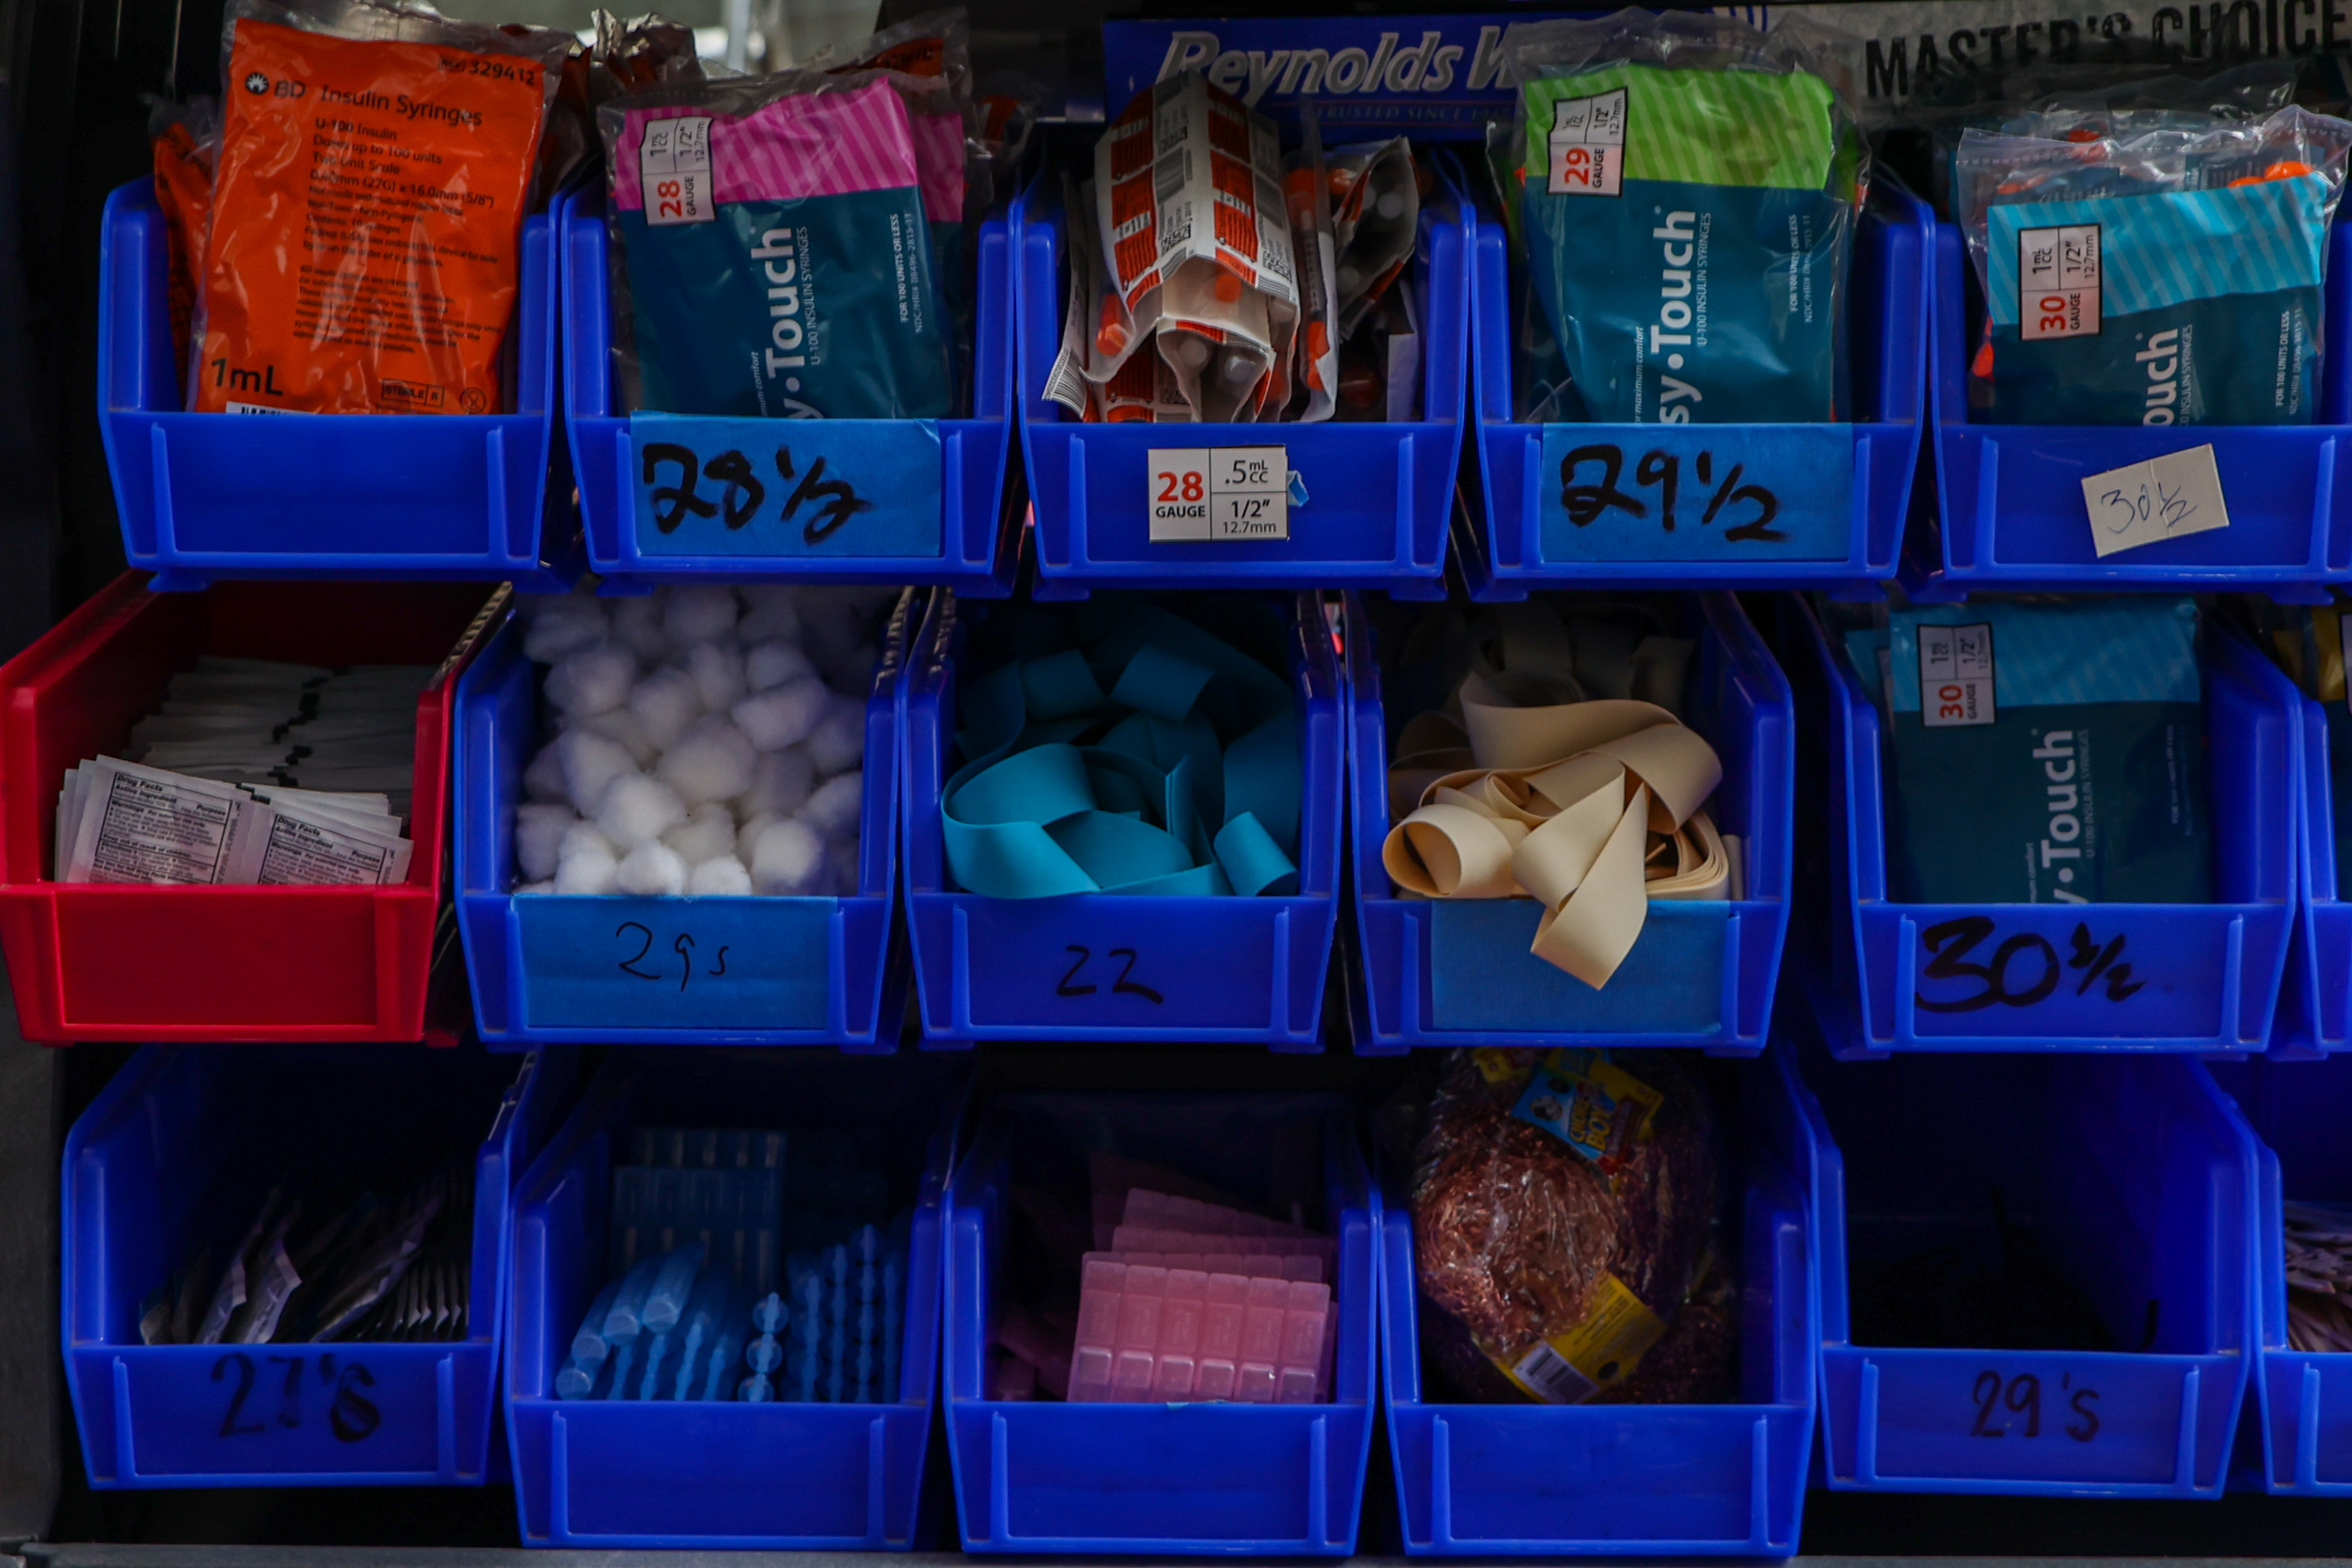 Blue storage bins with medical supplies, labeled with numbers and percentages.